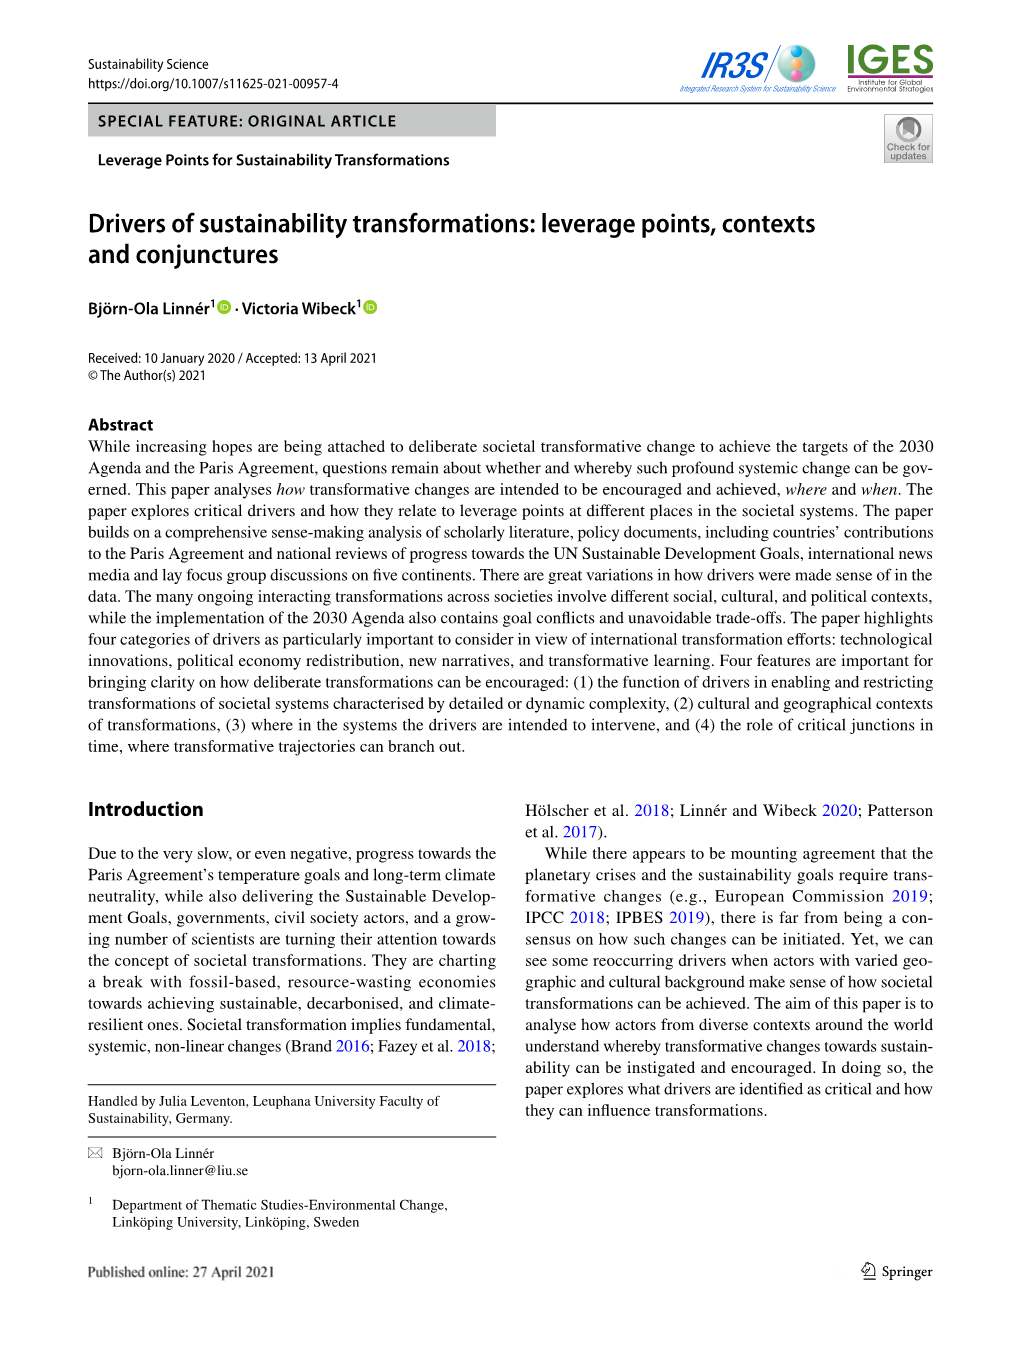 Drivers of Sustainability Transformations: Leverage Points, Contexts and Conjunctures